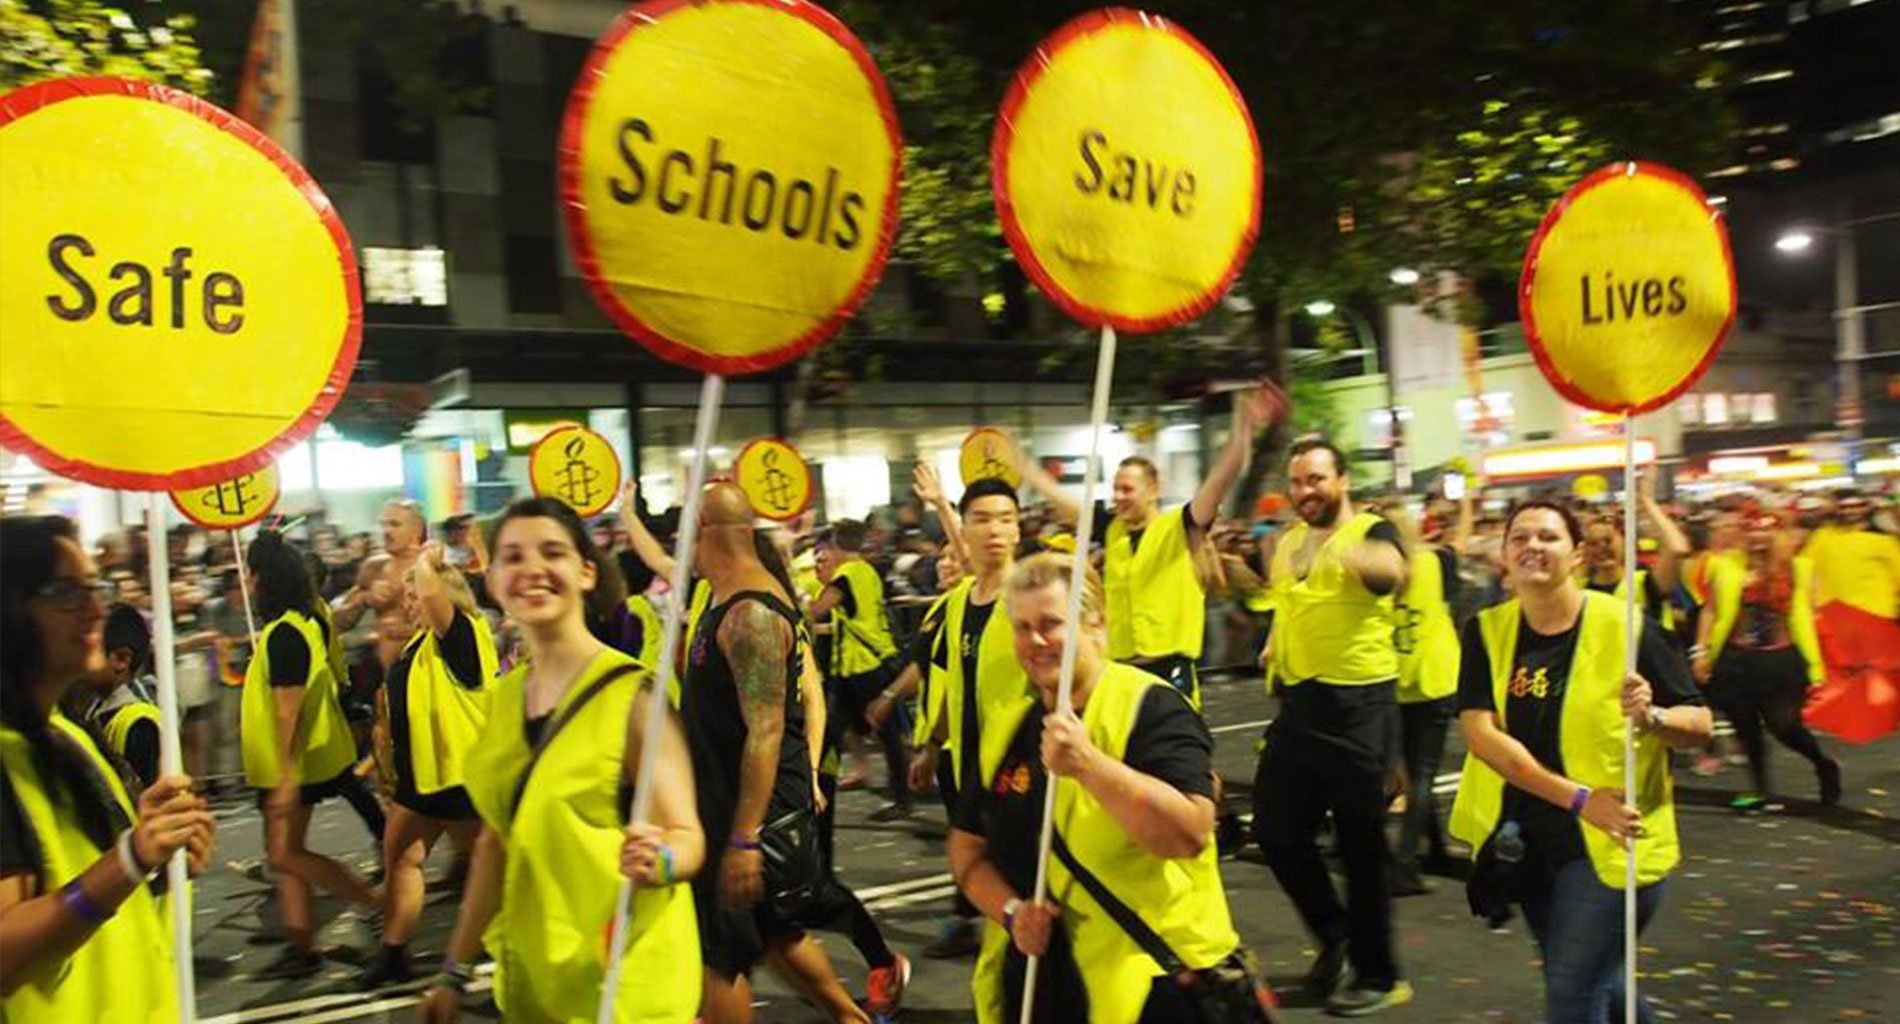 NSW LGBTQI Network at the 2017 Mardi Gras Parade. © Cosmo Price